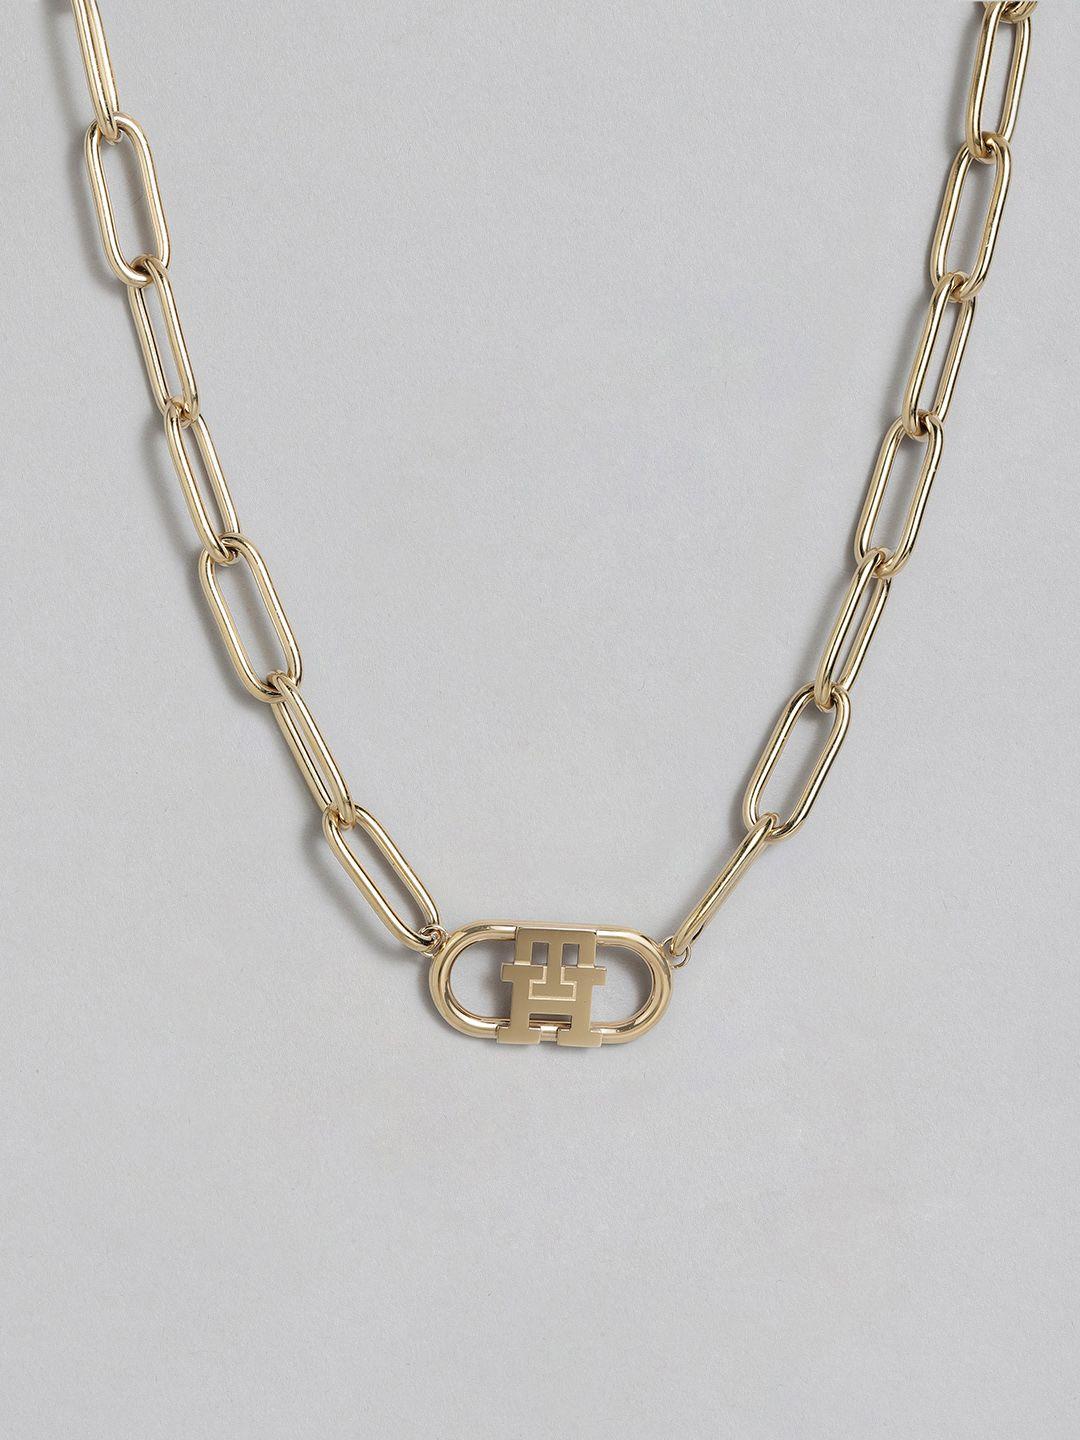 tommy-hilfiger-women-gold-plated-link-necklace-with-brand-logo-detail